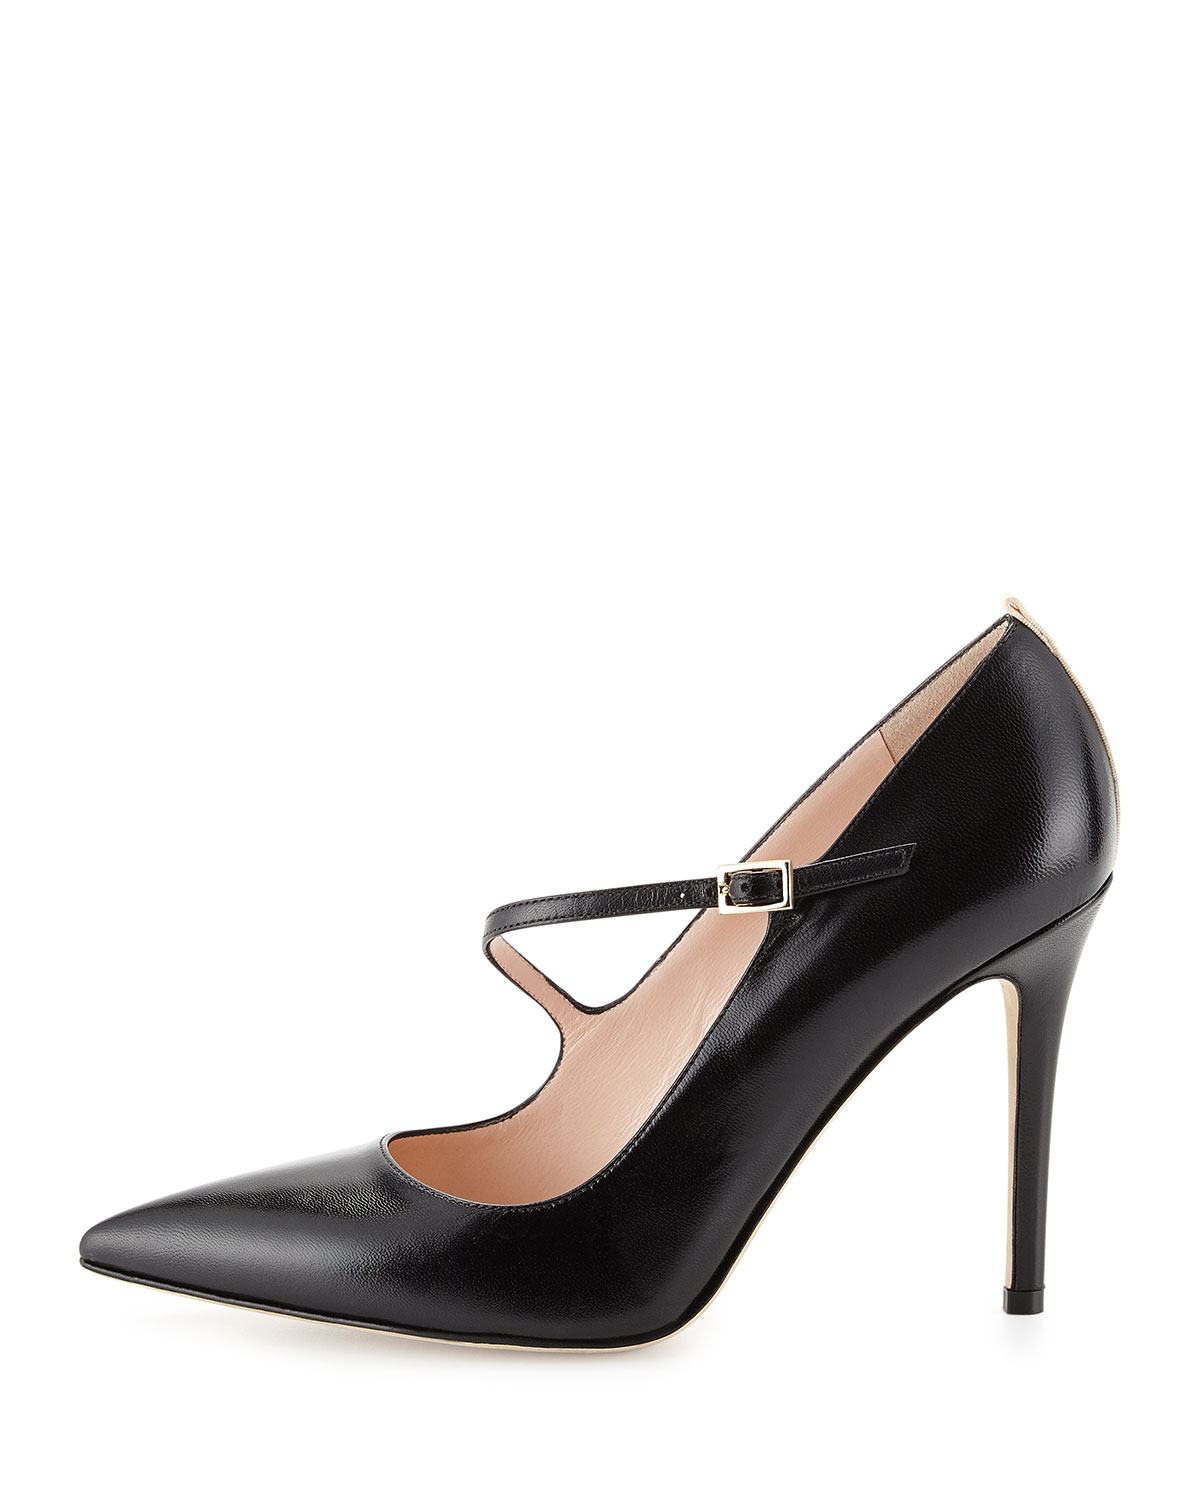 Lyst - Sjp By Sarah Jessica Parker Diana Asymmetric Leather Pump in Black